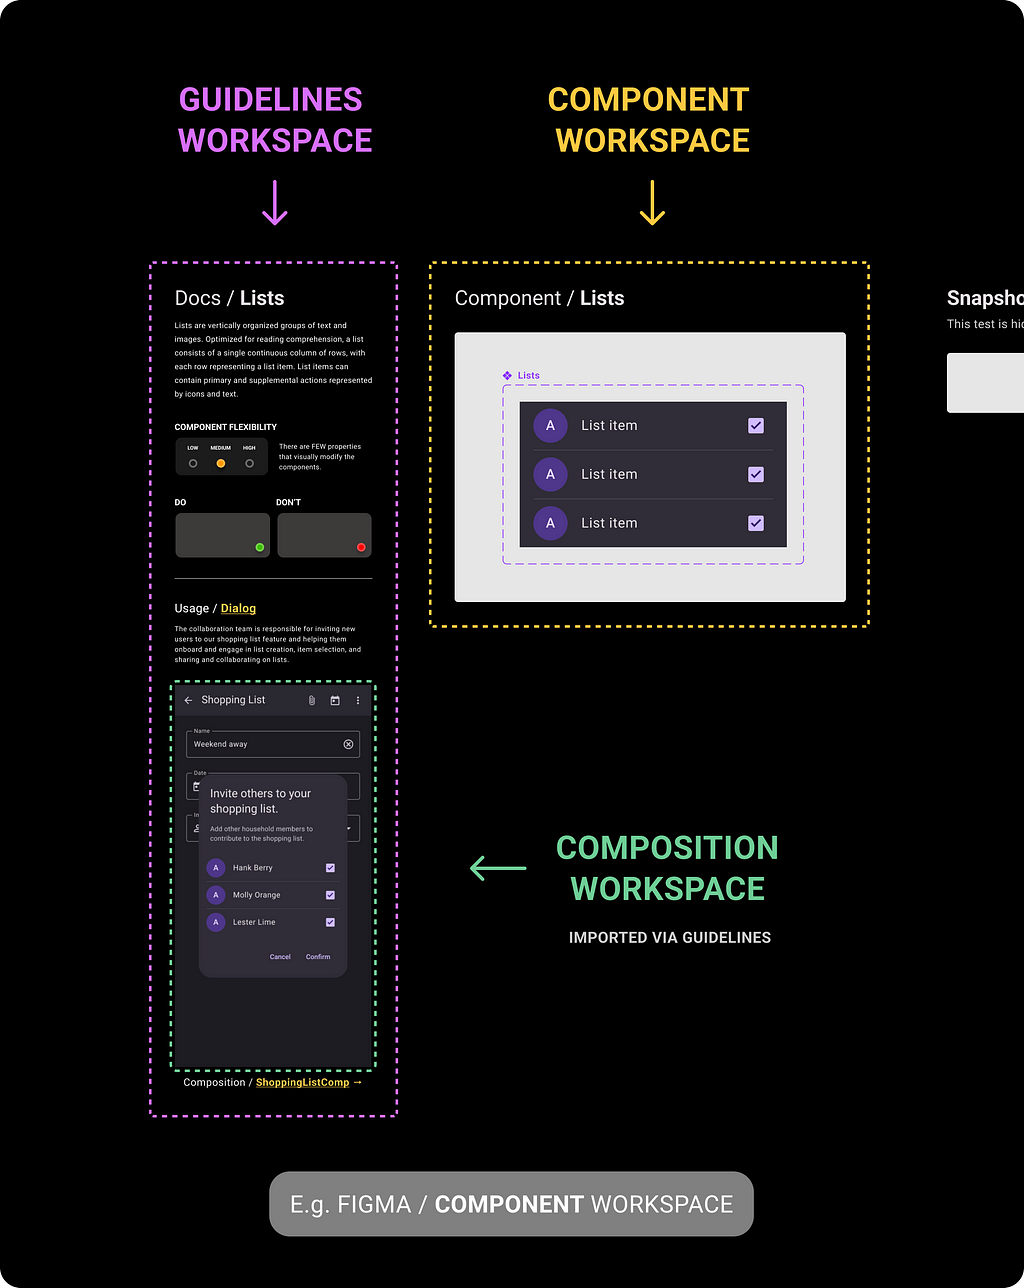 Guideline workspace examples are imported into the corresponding Component workspace within Figma.